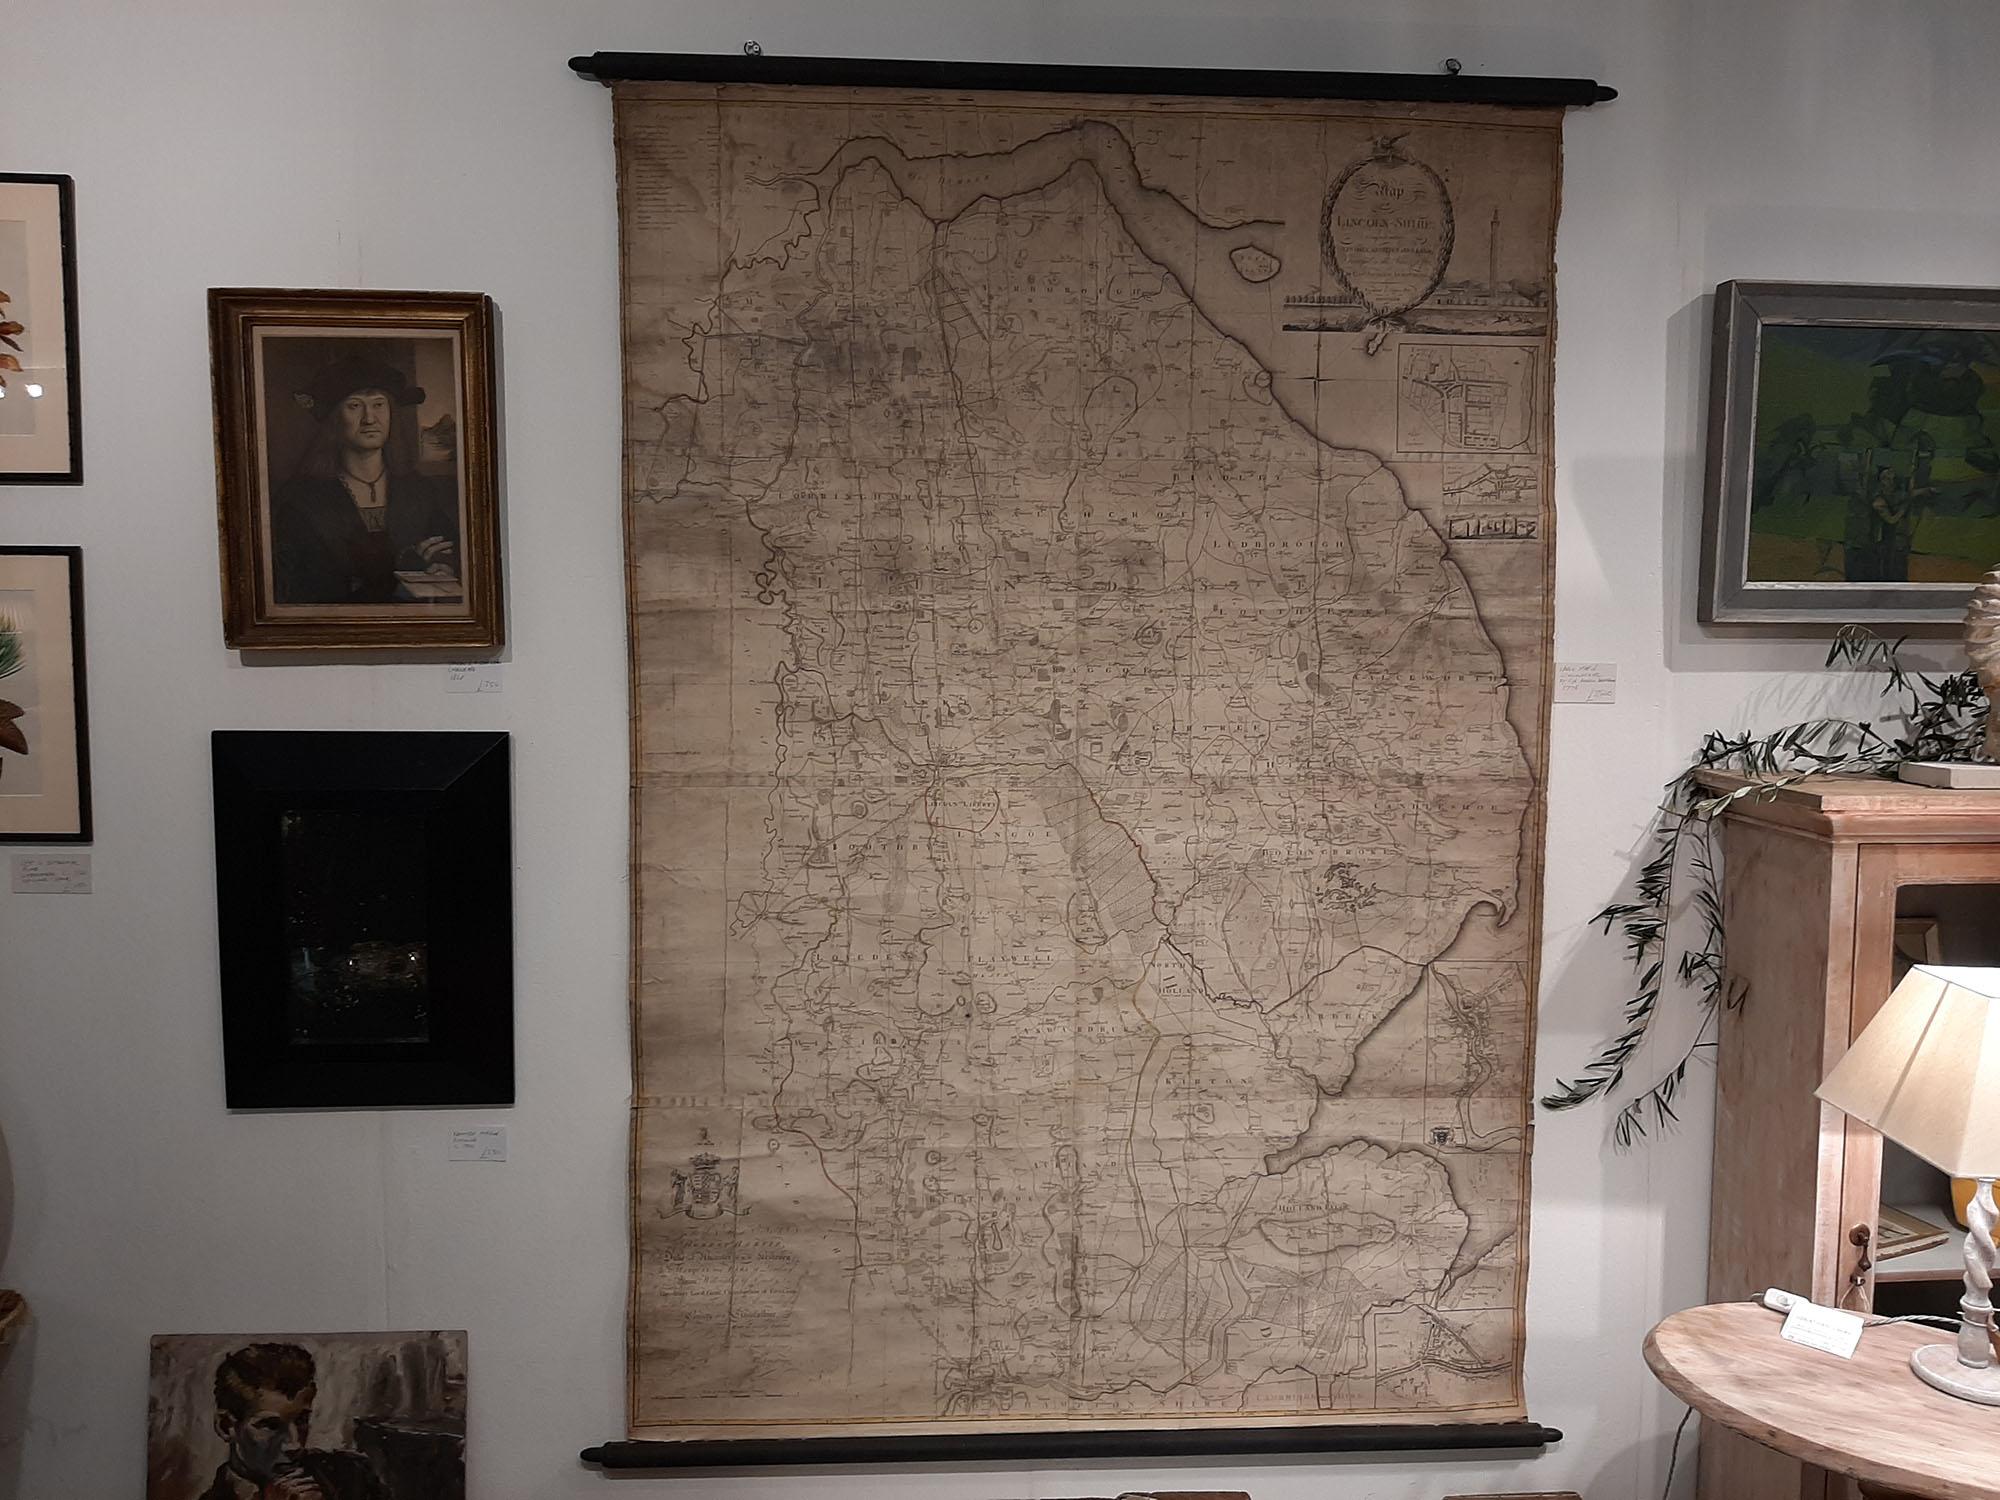 Wonderful scroll map of Lincolnshire

By Captain Armstrong, 1778

Copper plate engraving on paper laid on canvas

Original ebonised wood frame with lovely turned finials

The map can be rolled up for easy transport

There are signs of